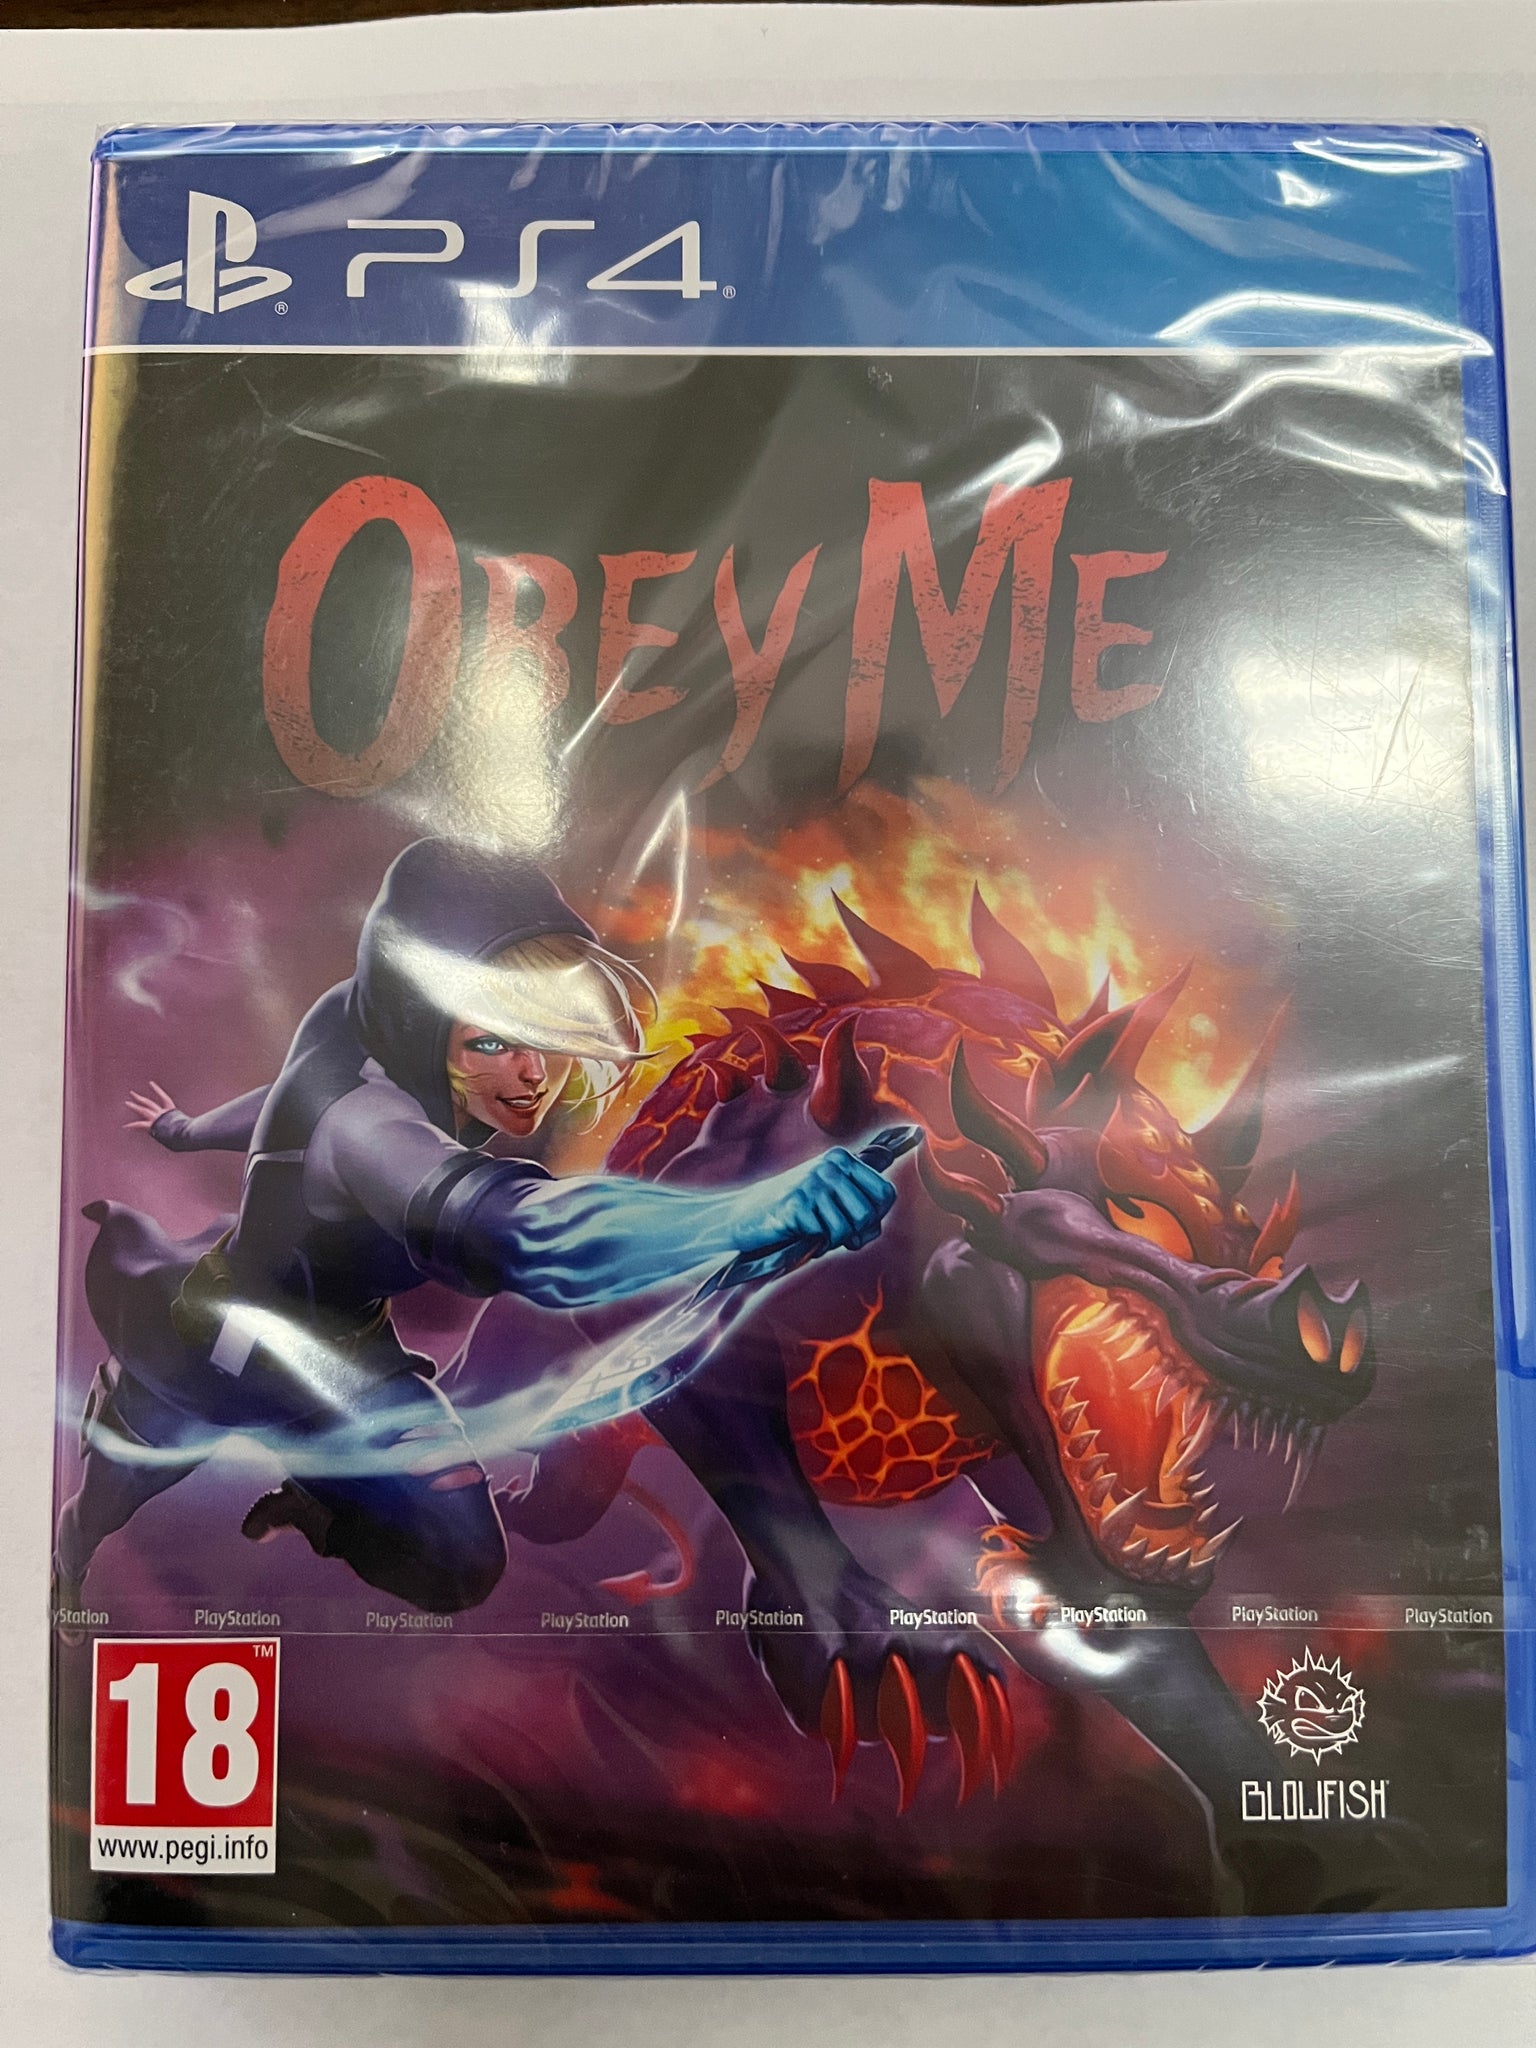 PS4 "Obey Me"